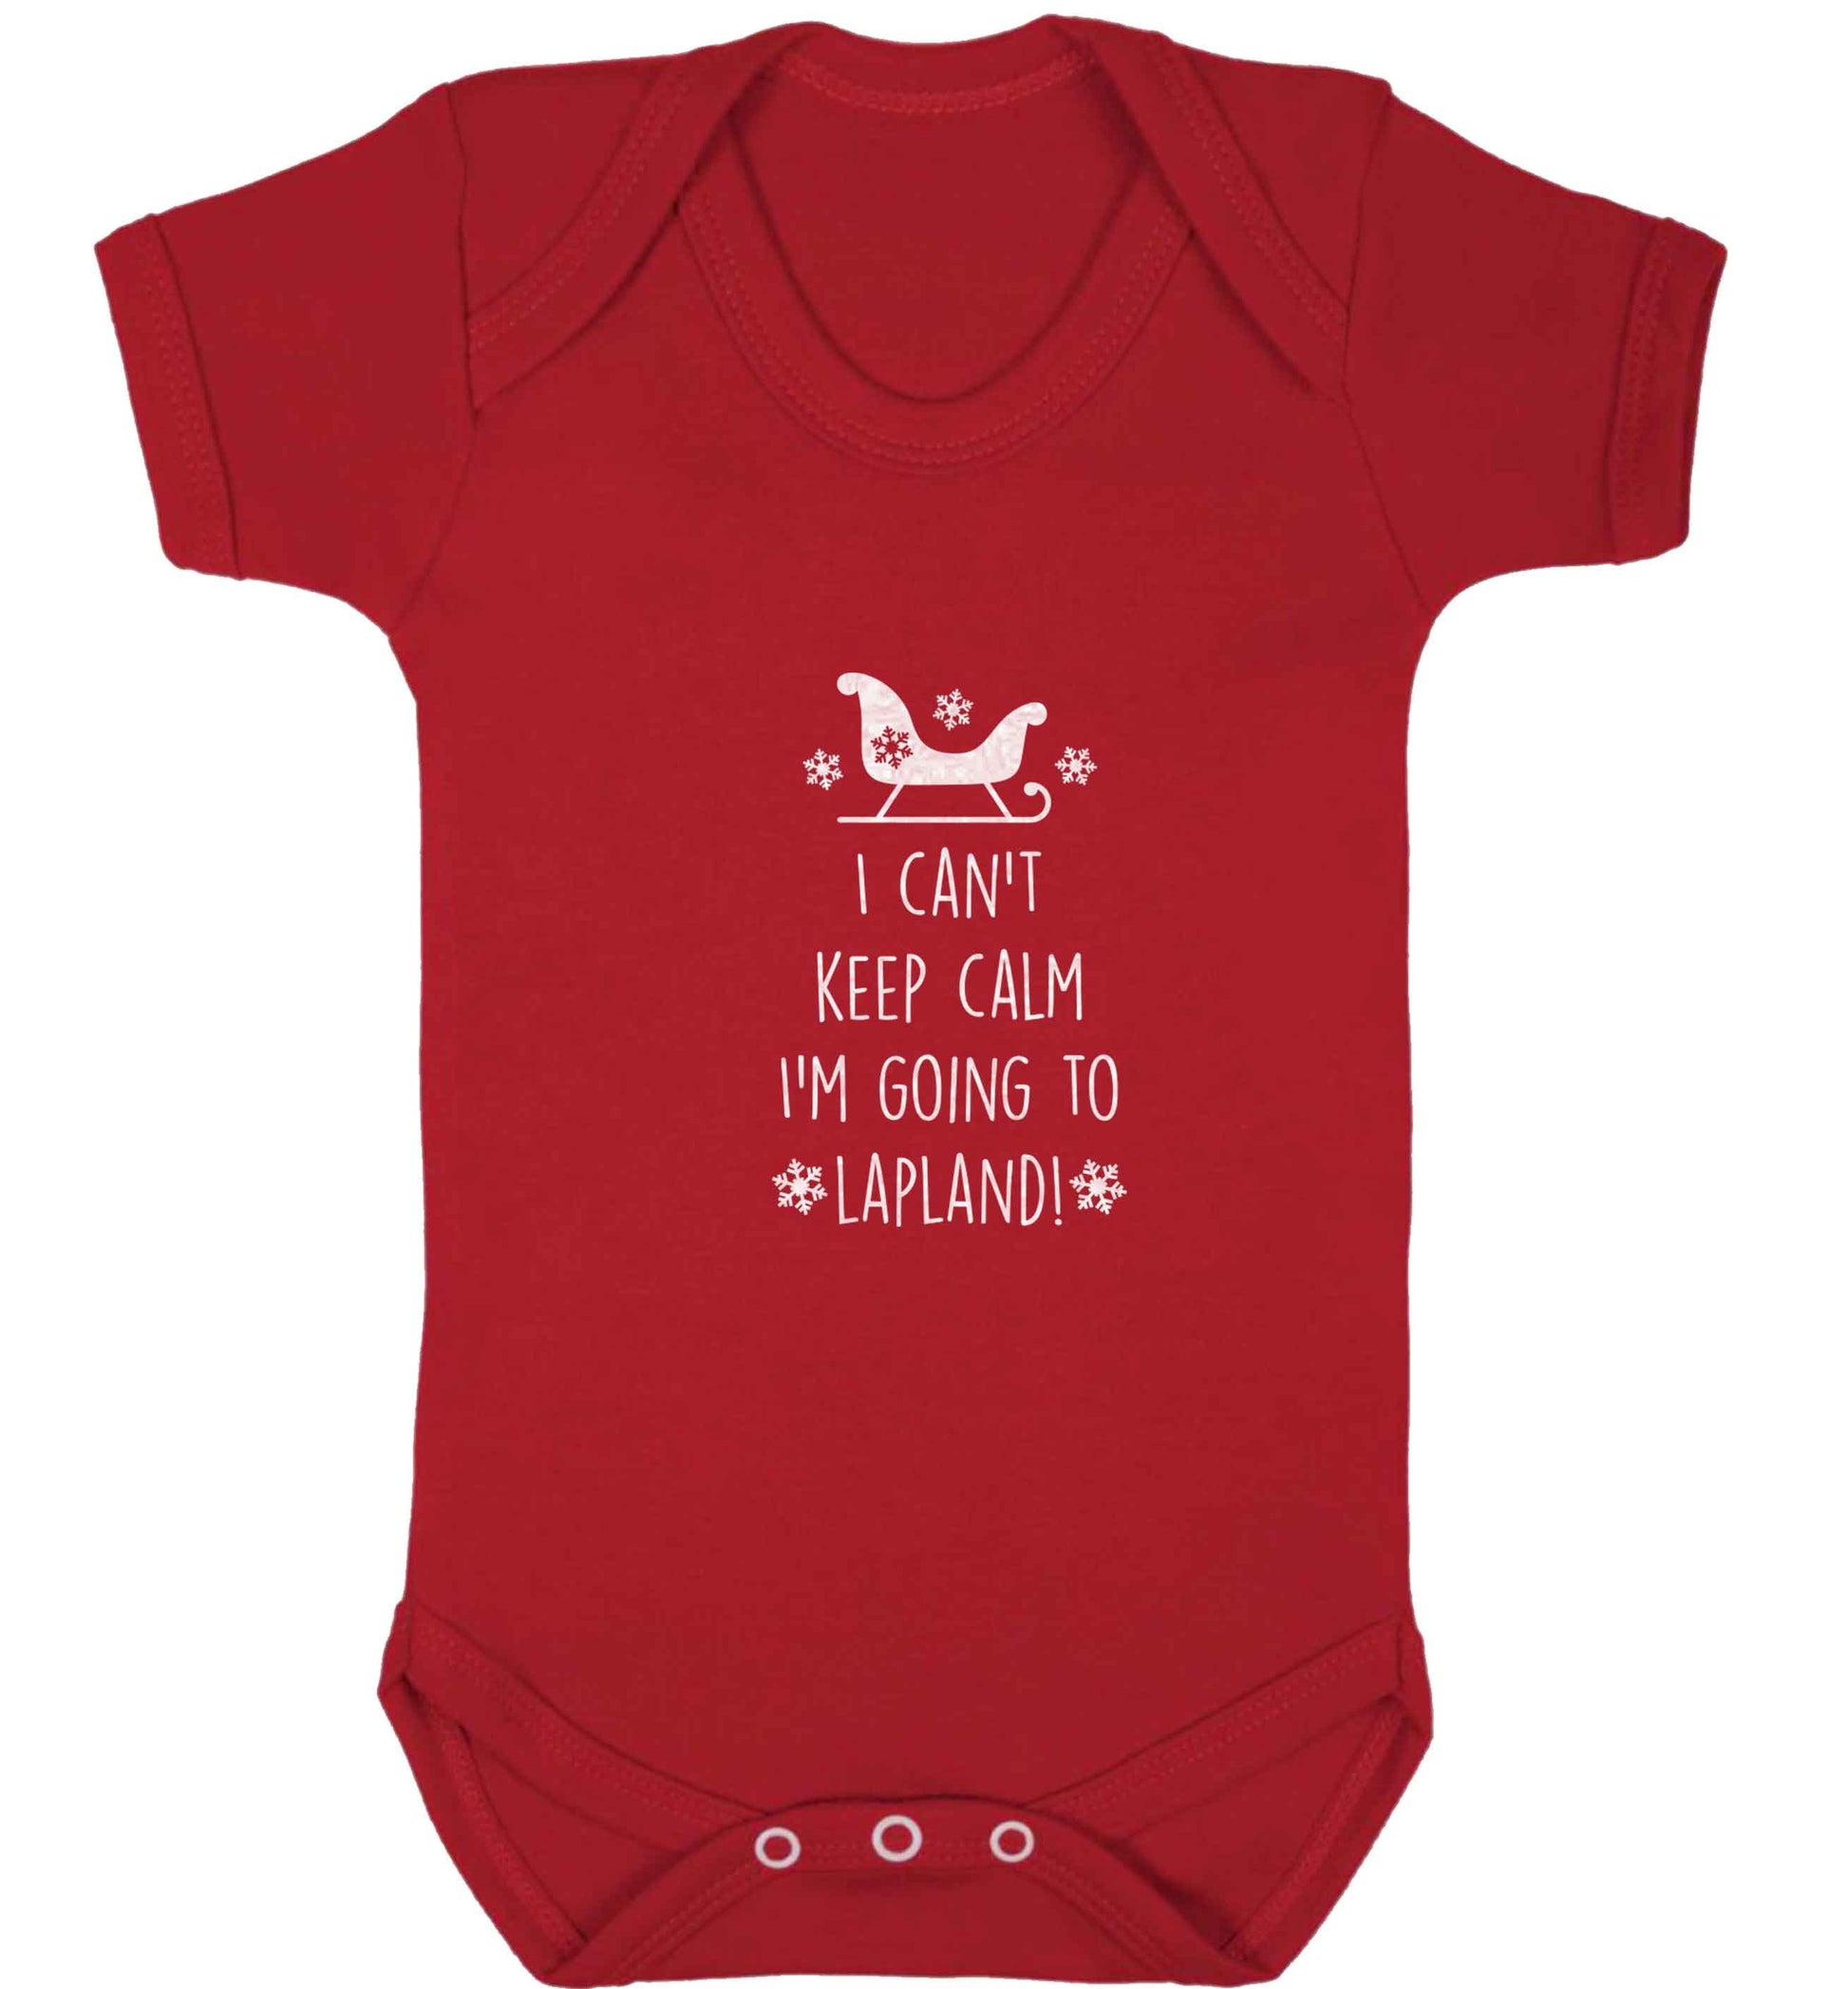 I can't keep calm I'm going to Lapland baby vest red 18-24 months